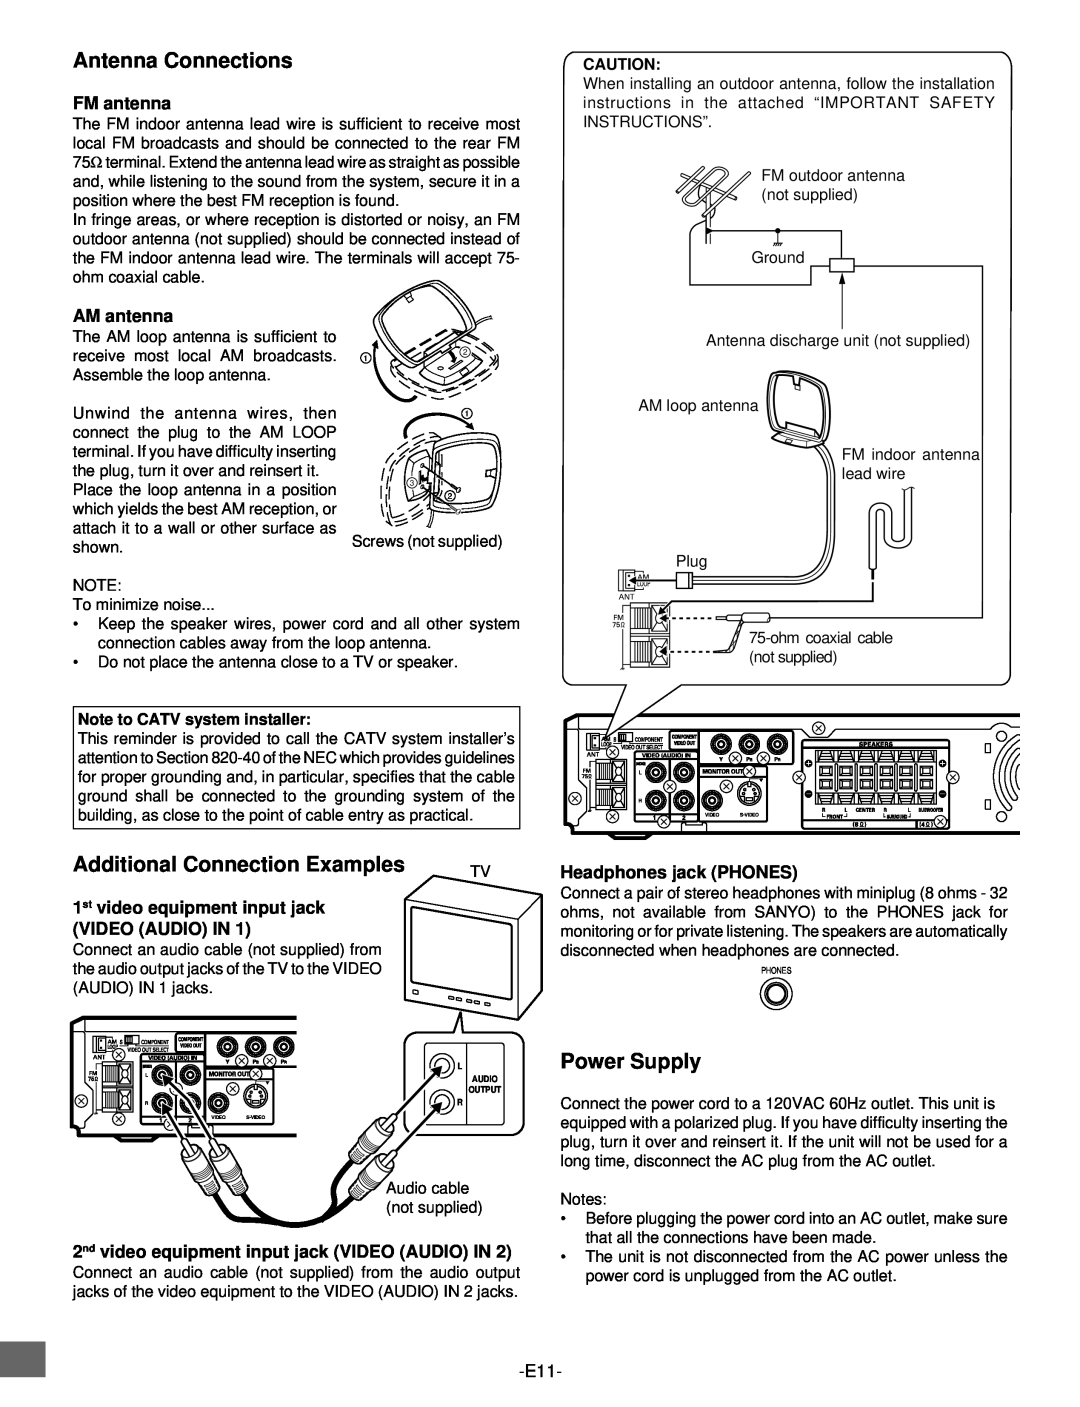 Sanyo DWM-2500 instruction manual Antenna Connections, Additional Connection Examples, Power Supply, FM antenna, AM antenna 